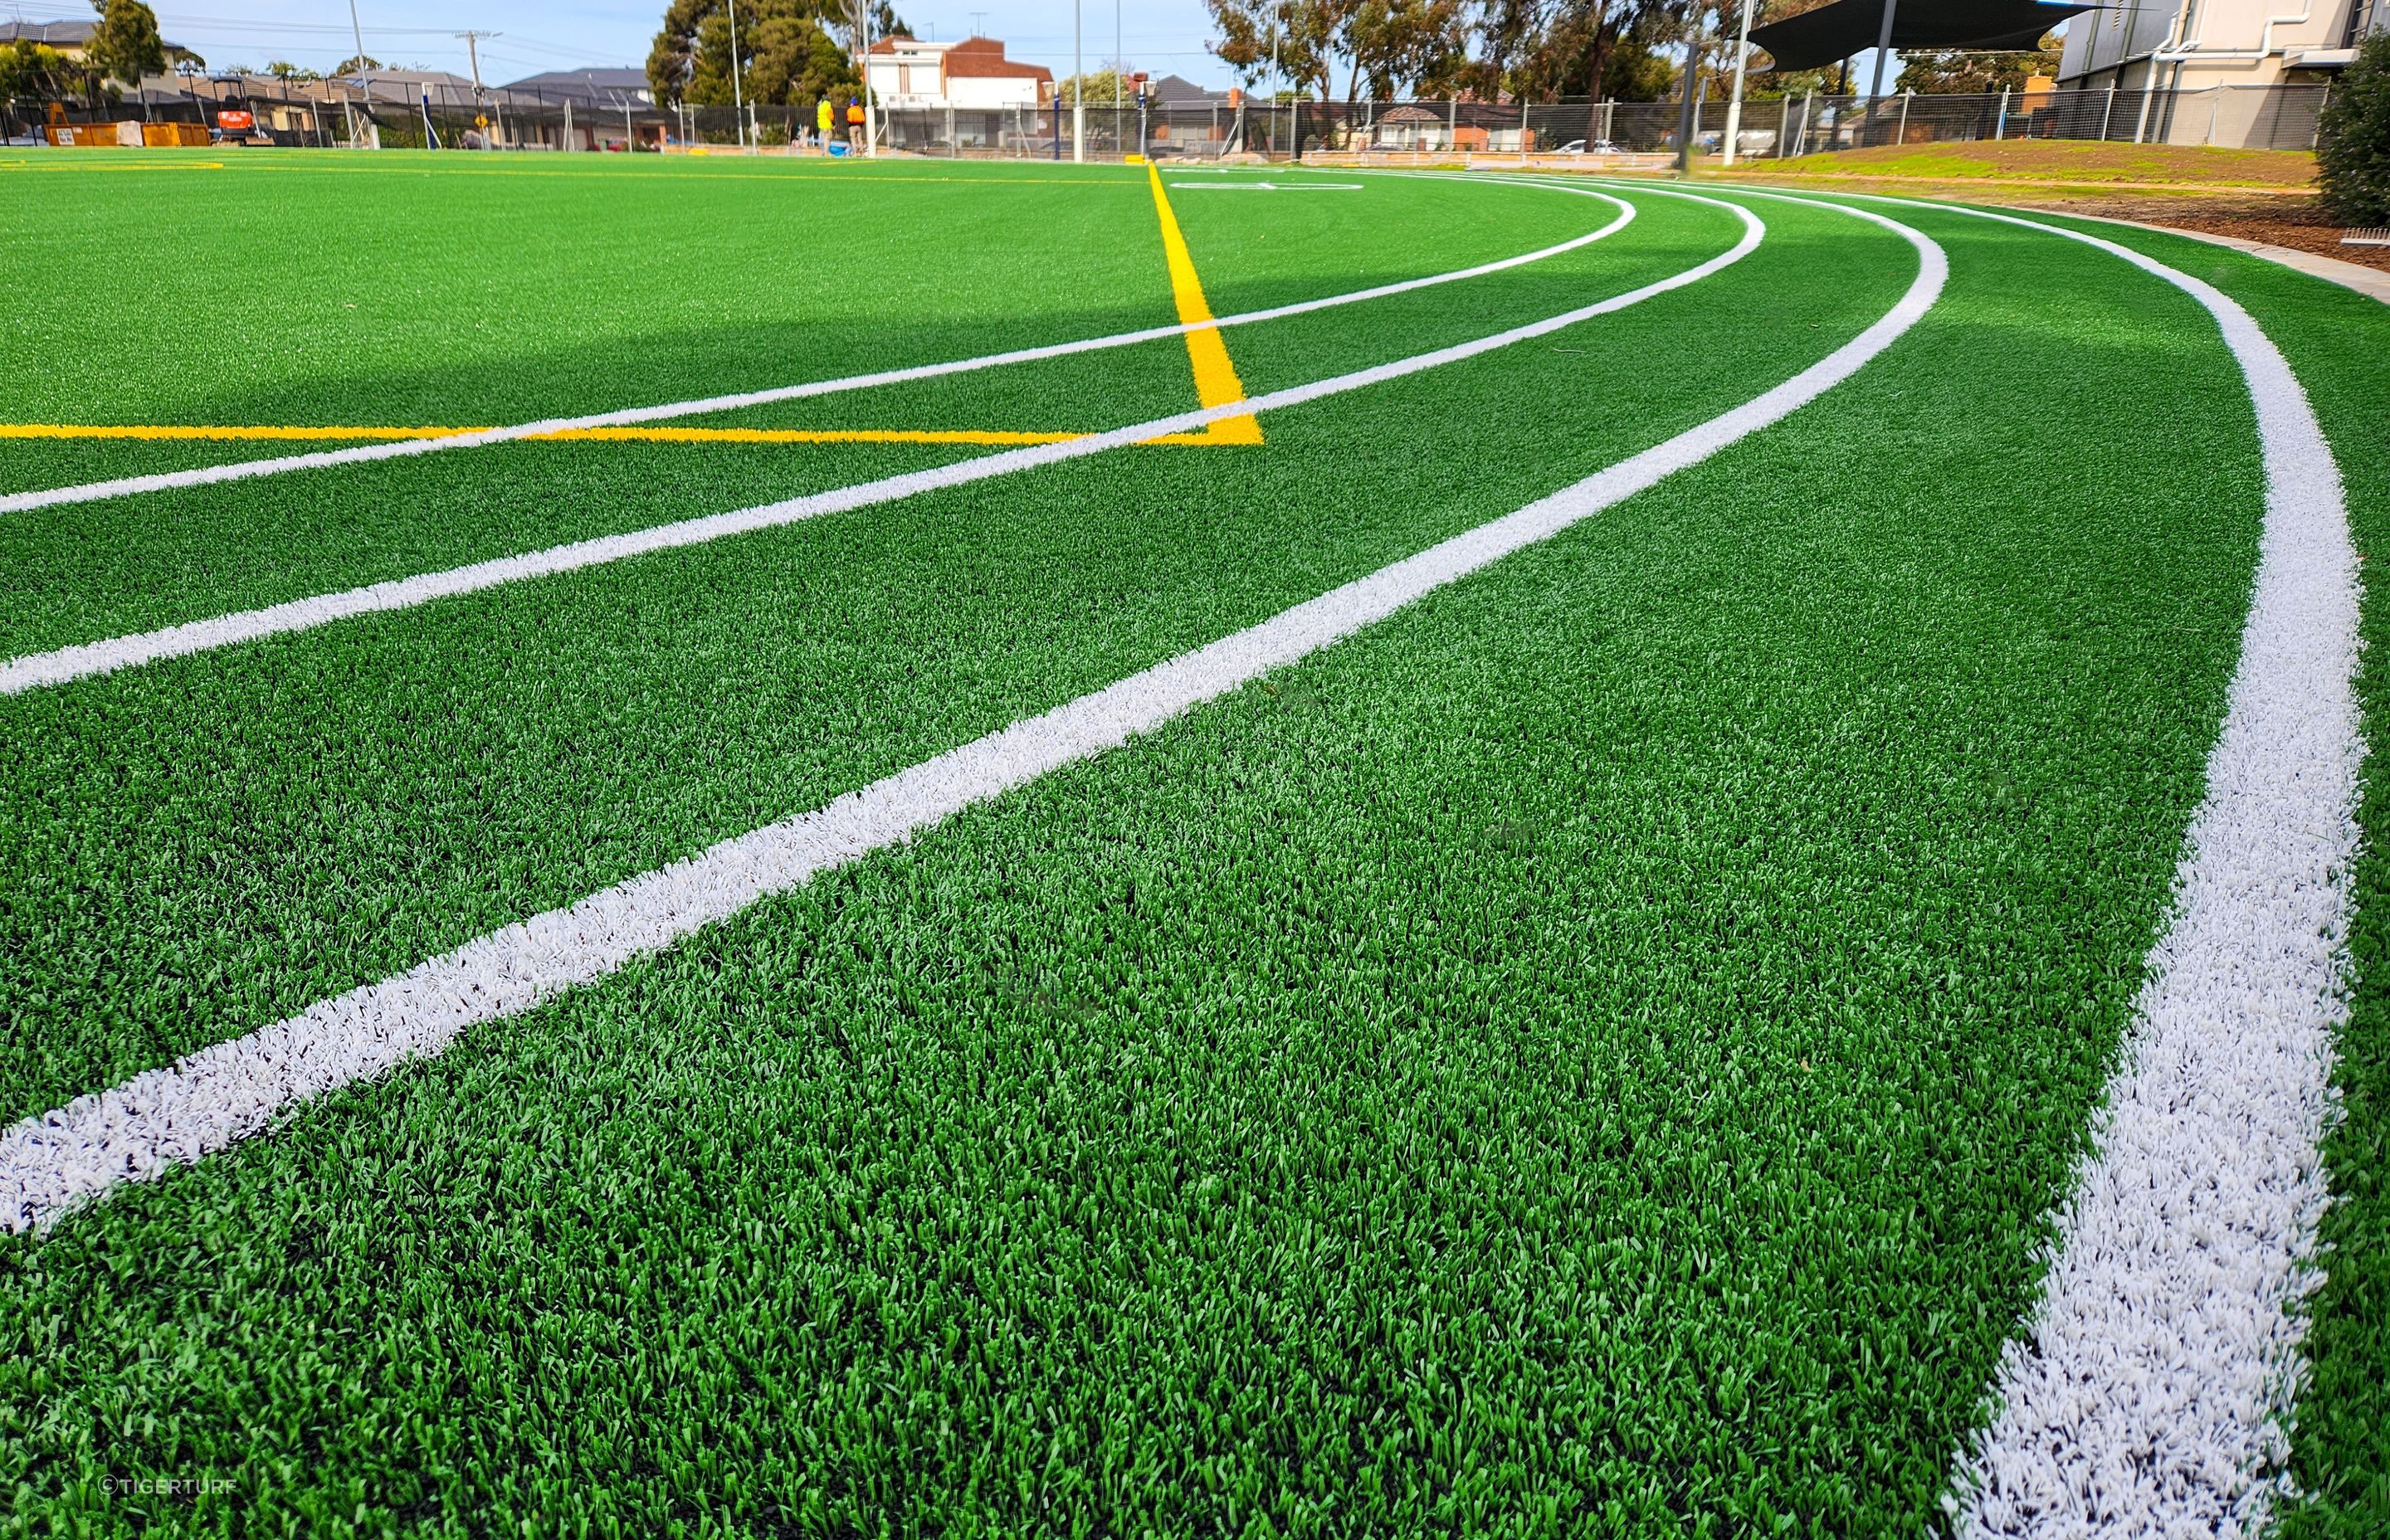 TigerTurf’s Endurance Play is one of the most durable yarns on the market for education projects and is perfect for versatile multisport areas